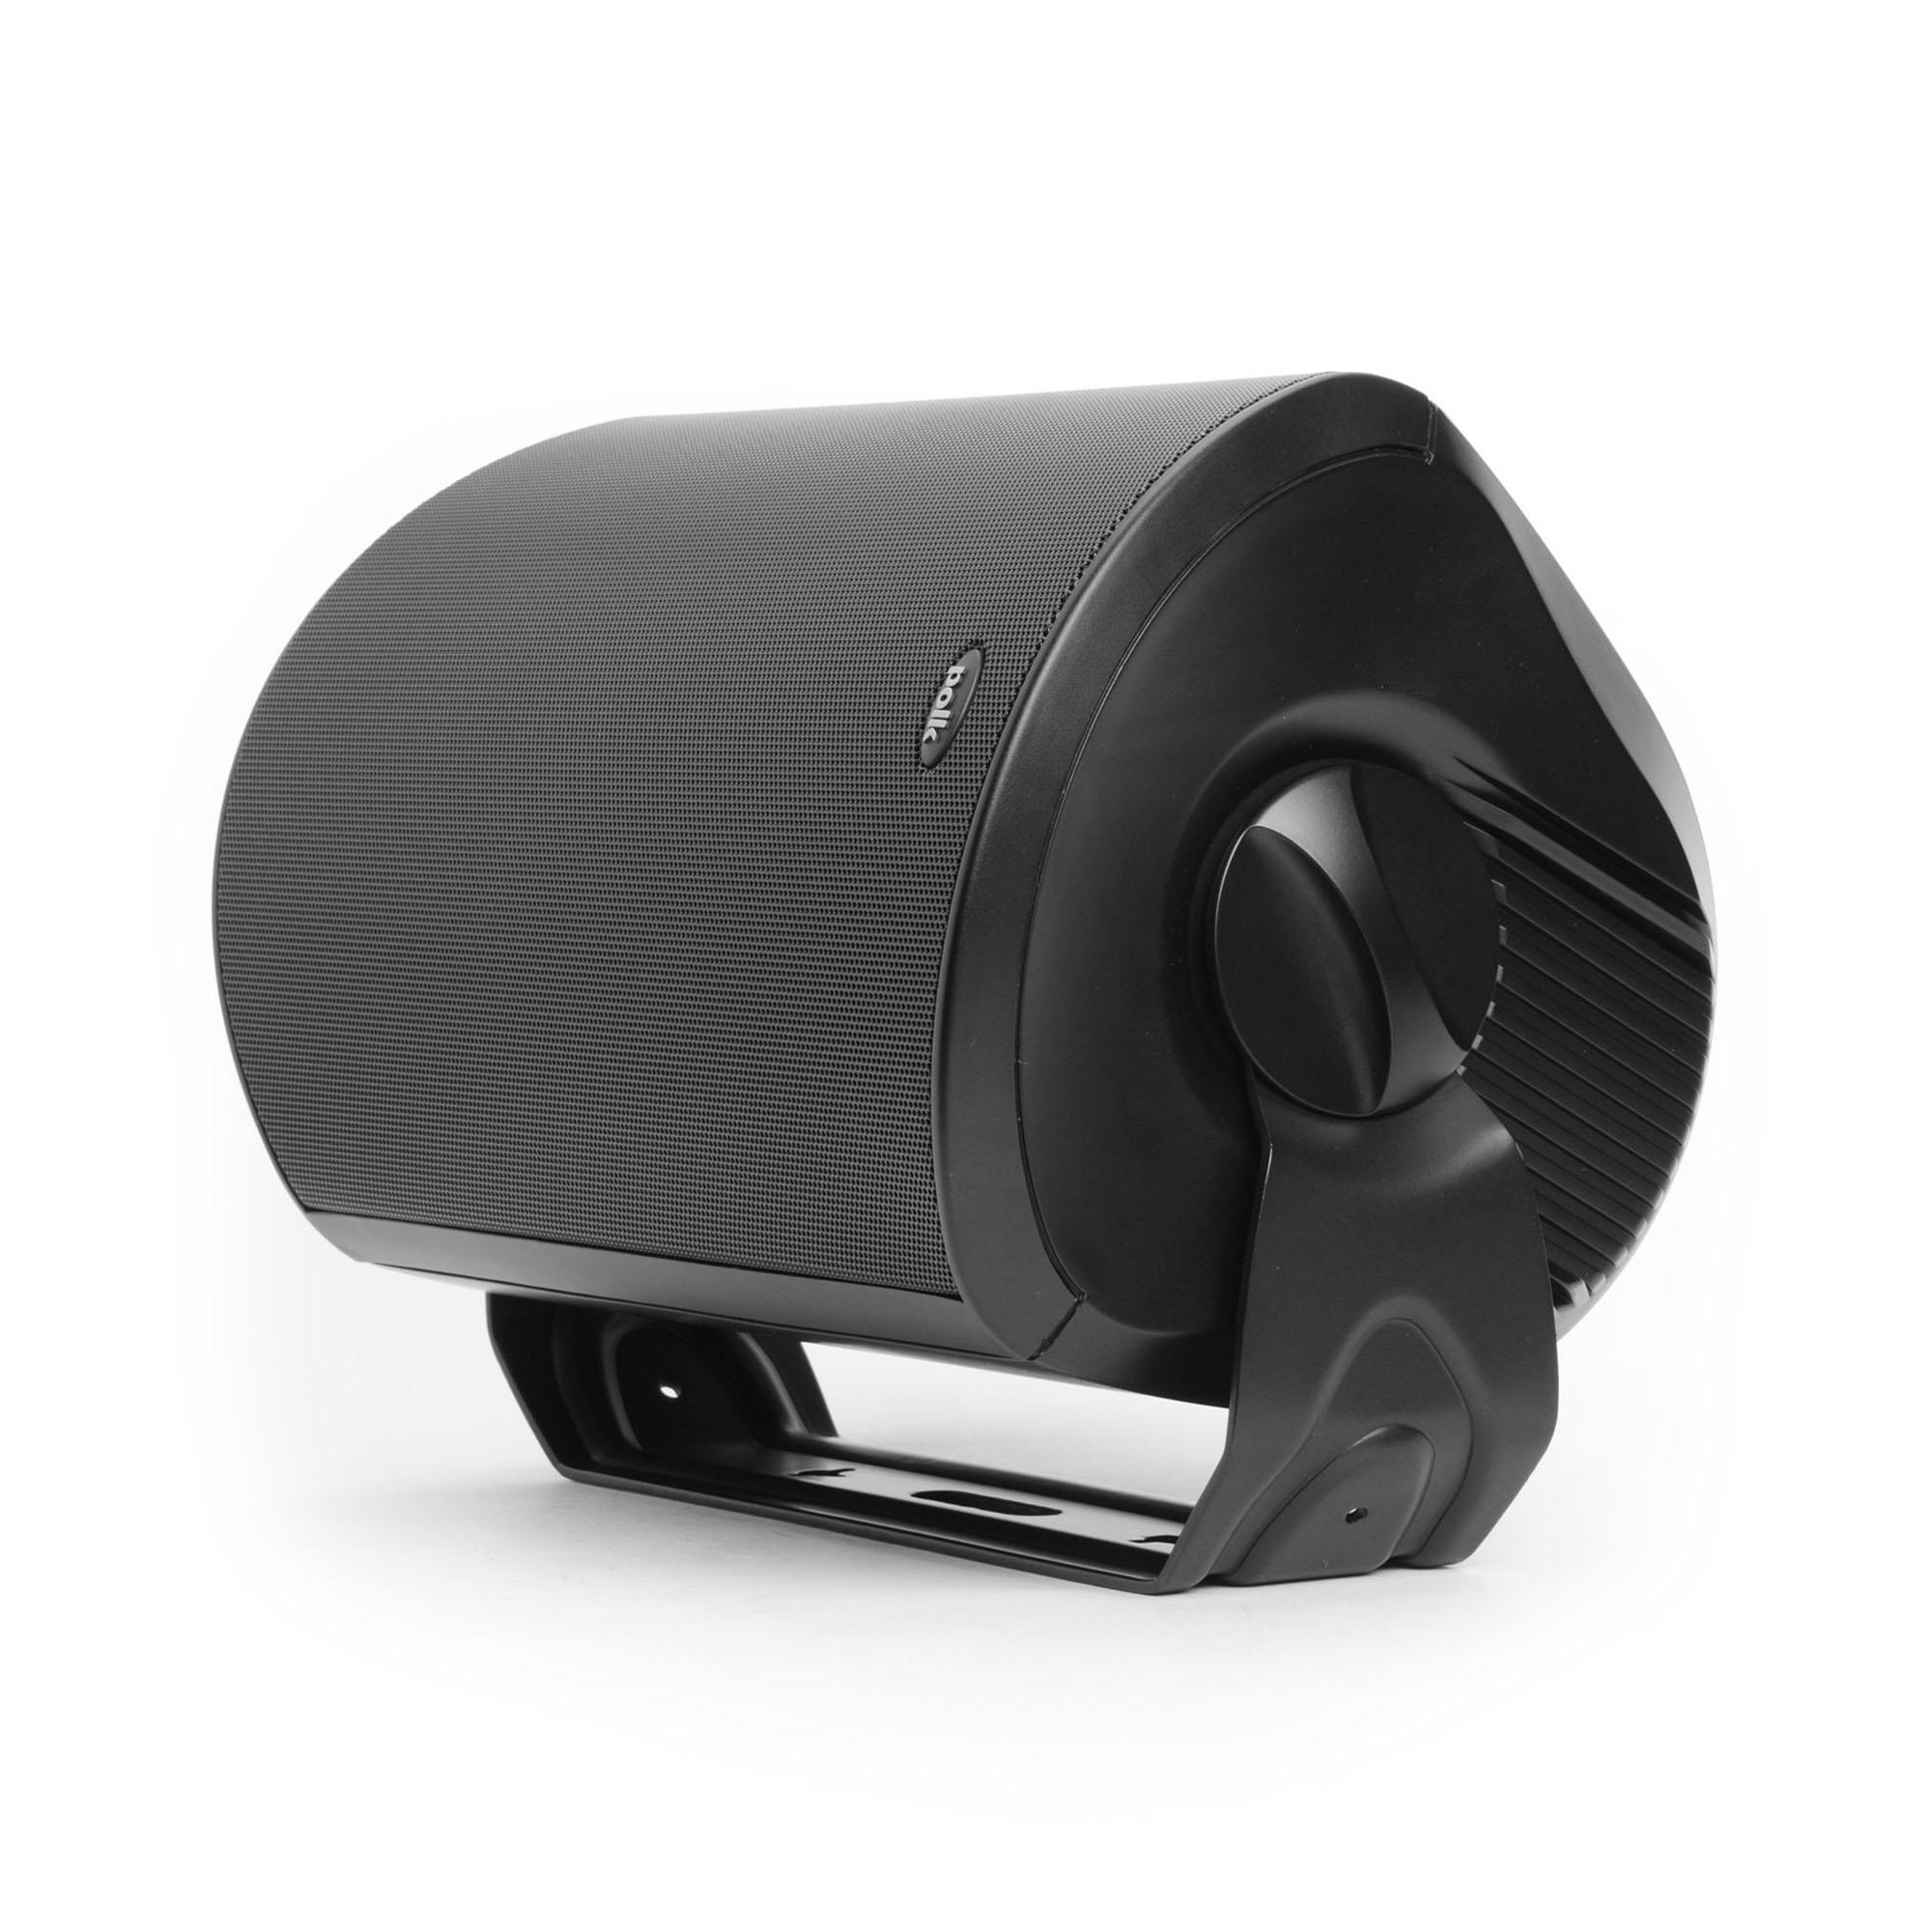 PO-ATRIUM-8SDI All-weather outdoor loudspeaker with Dual Tweeters, PowerPort Bass Venting (single). Black or White